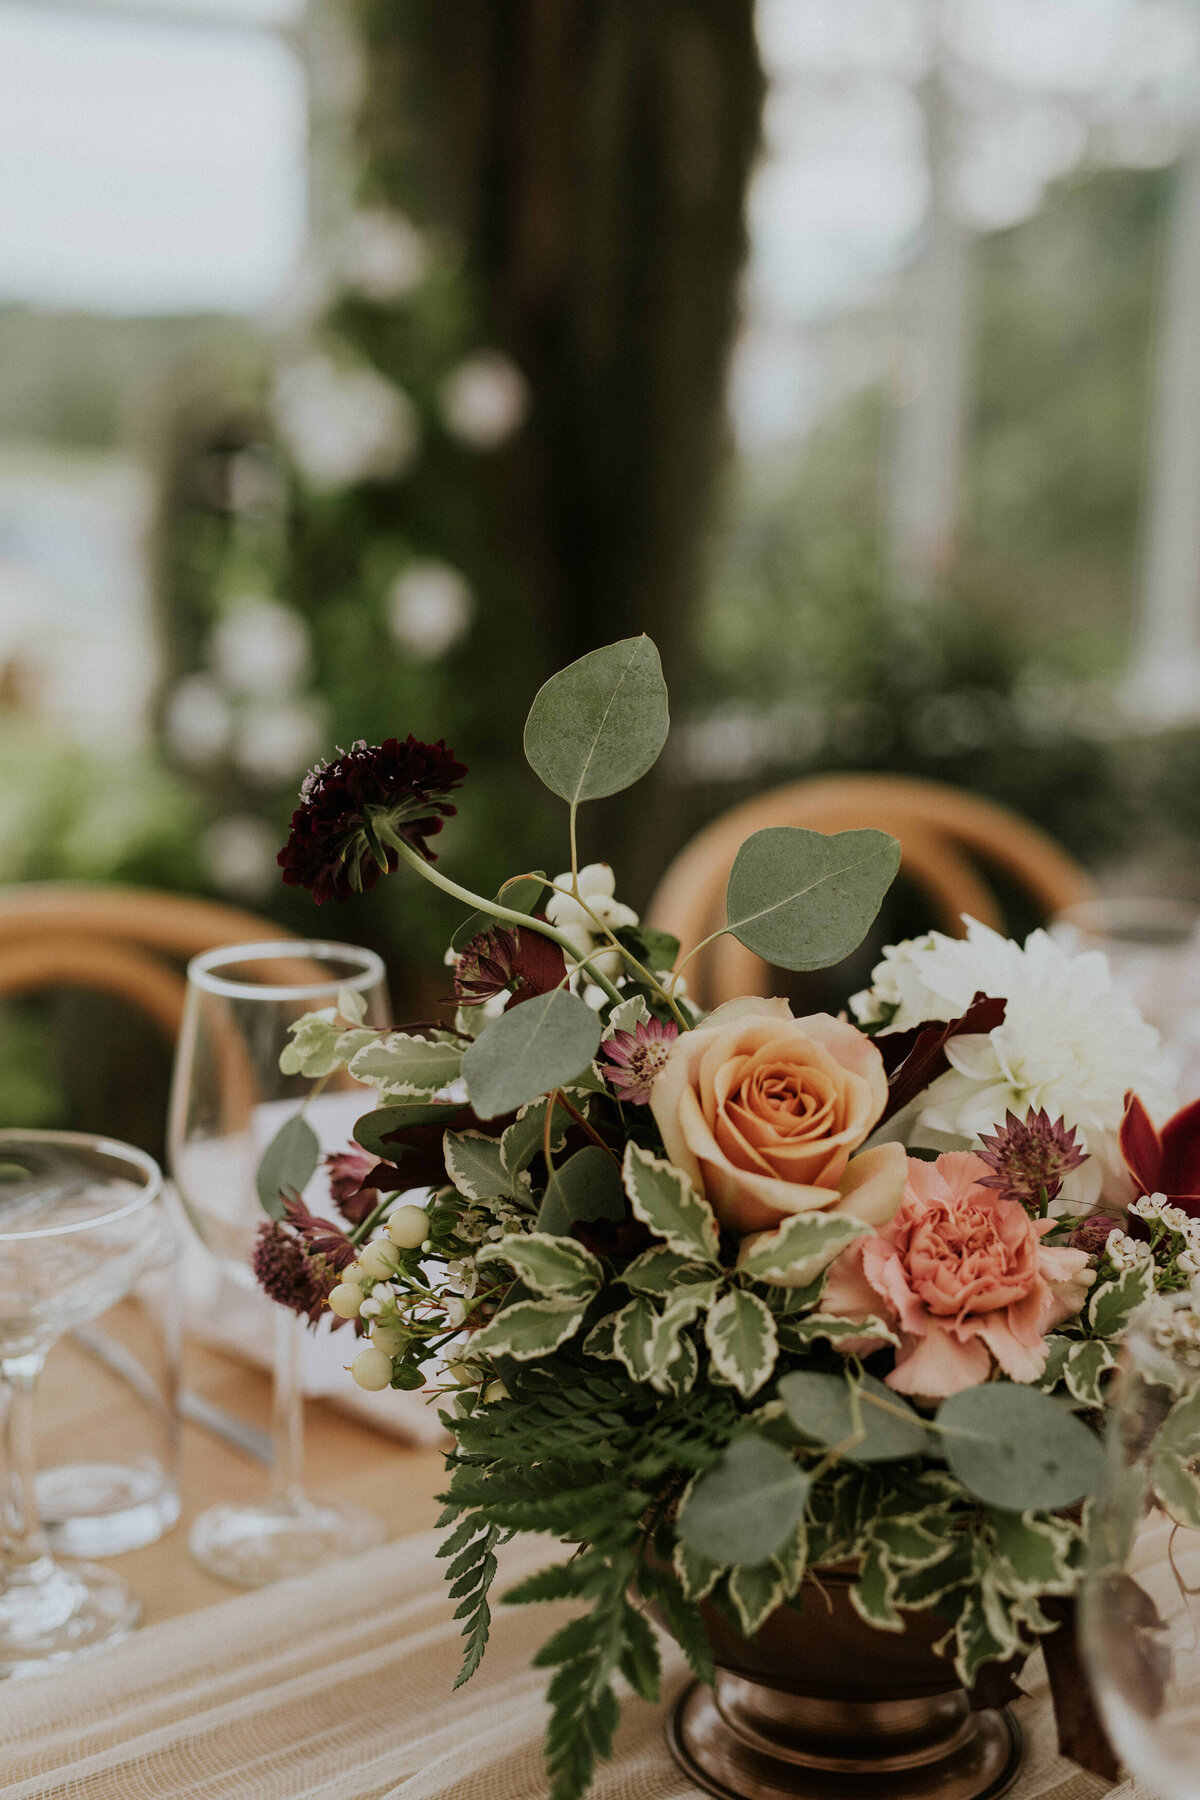 A wedding reception table with a centerpiece of white dahlias, dark purple scabiosa, mustard roses, peach carnations and mixed greenery in a bronze footed bowl